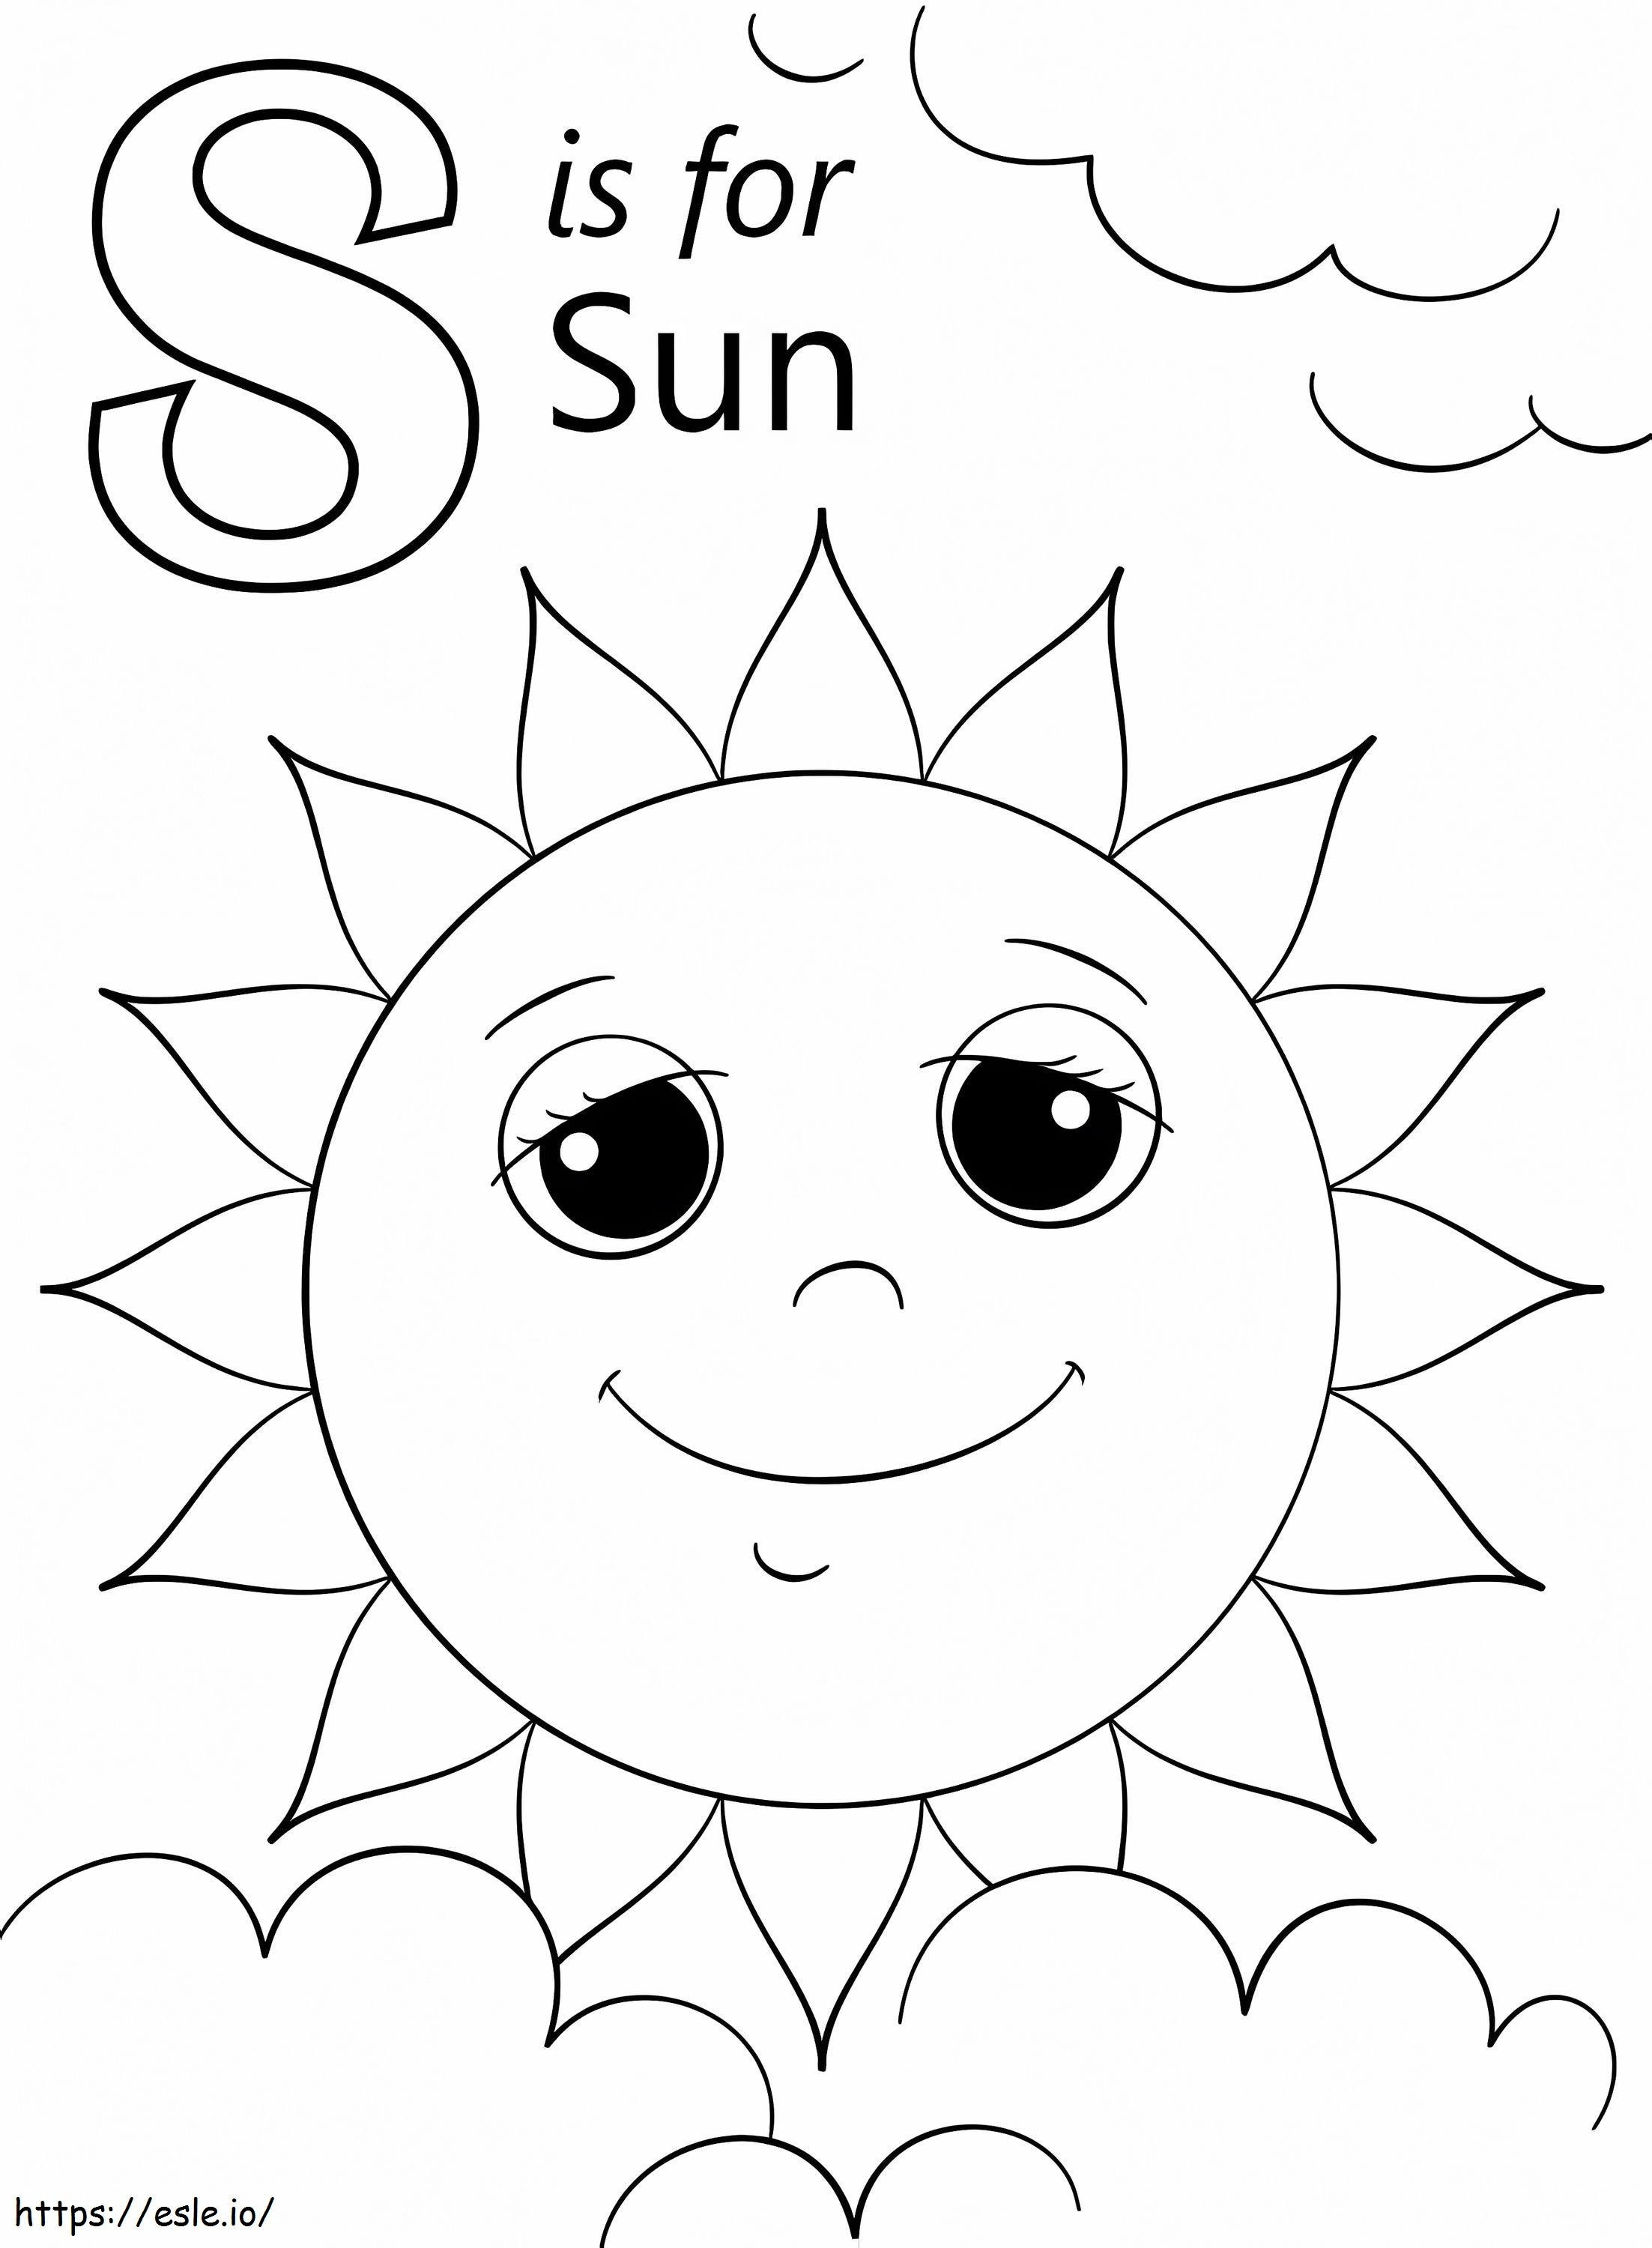 Sun Letter S coloring page